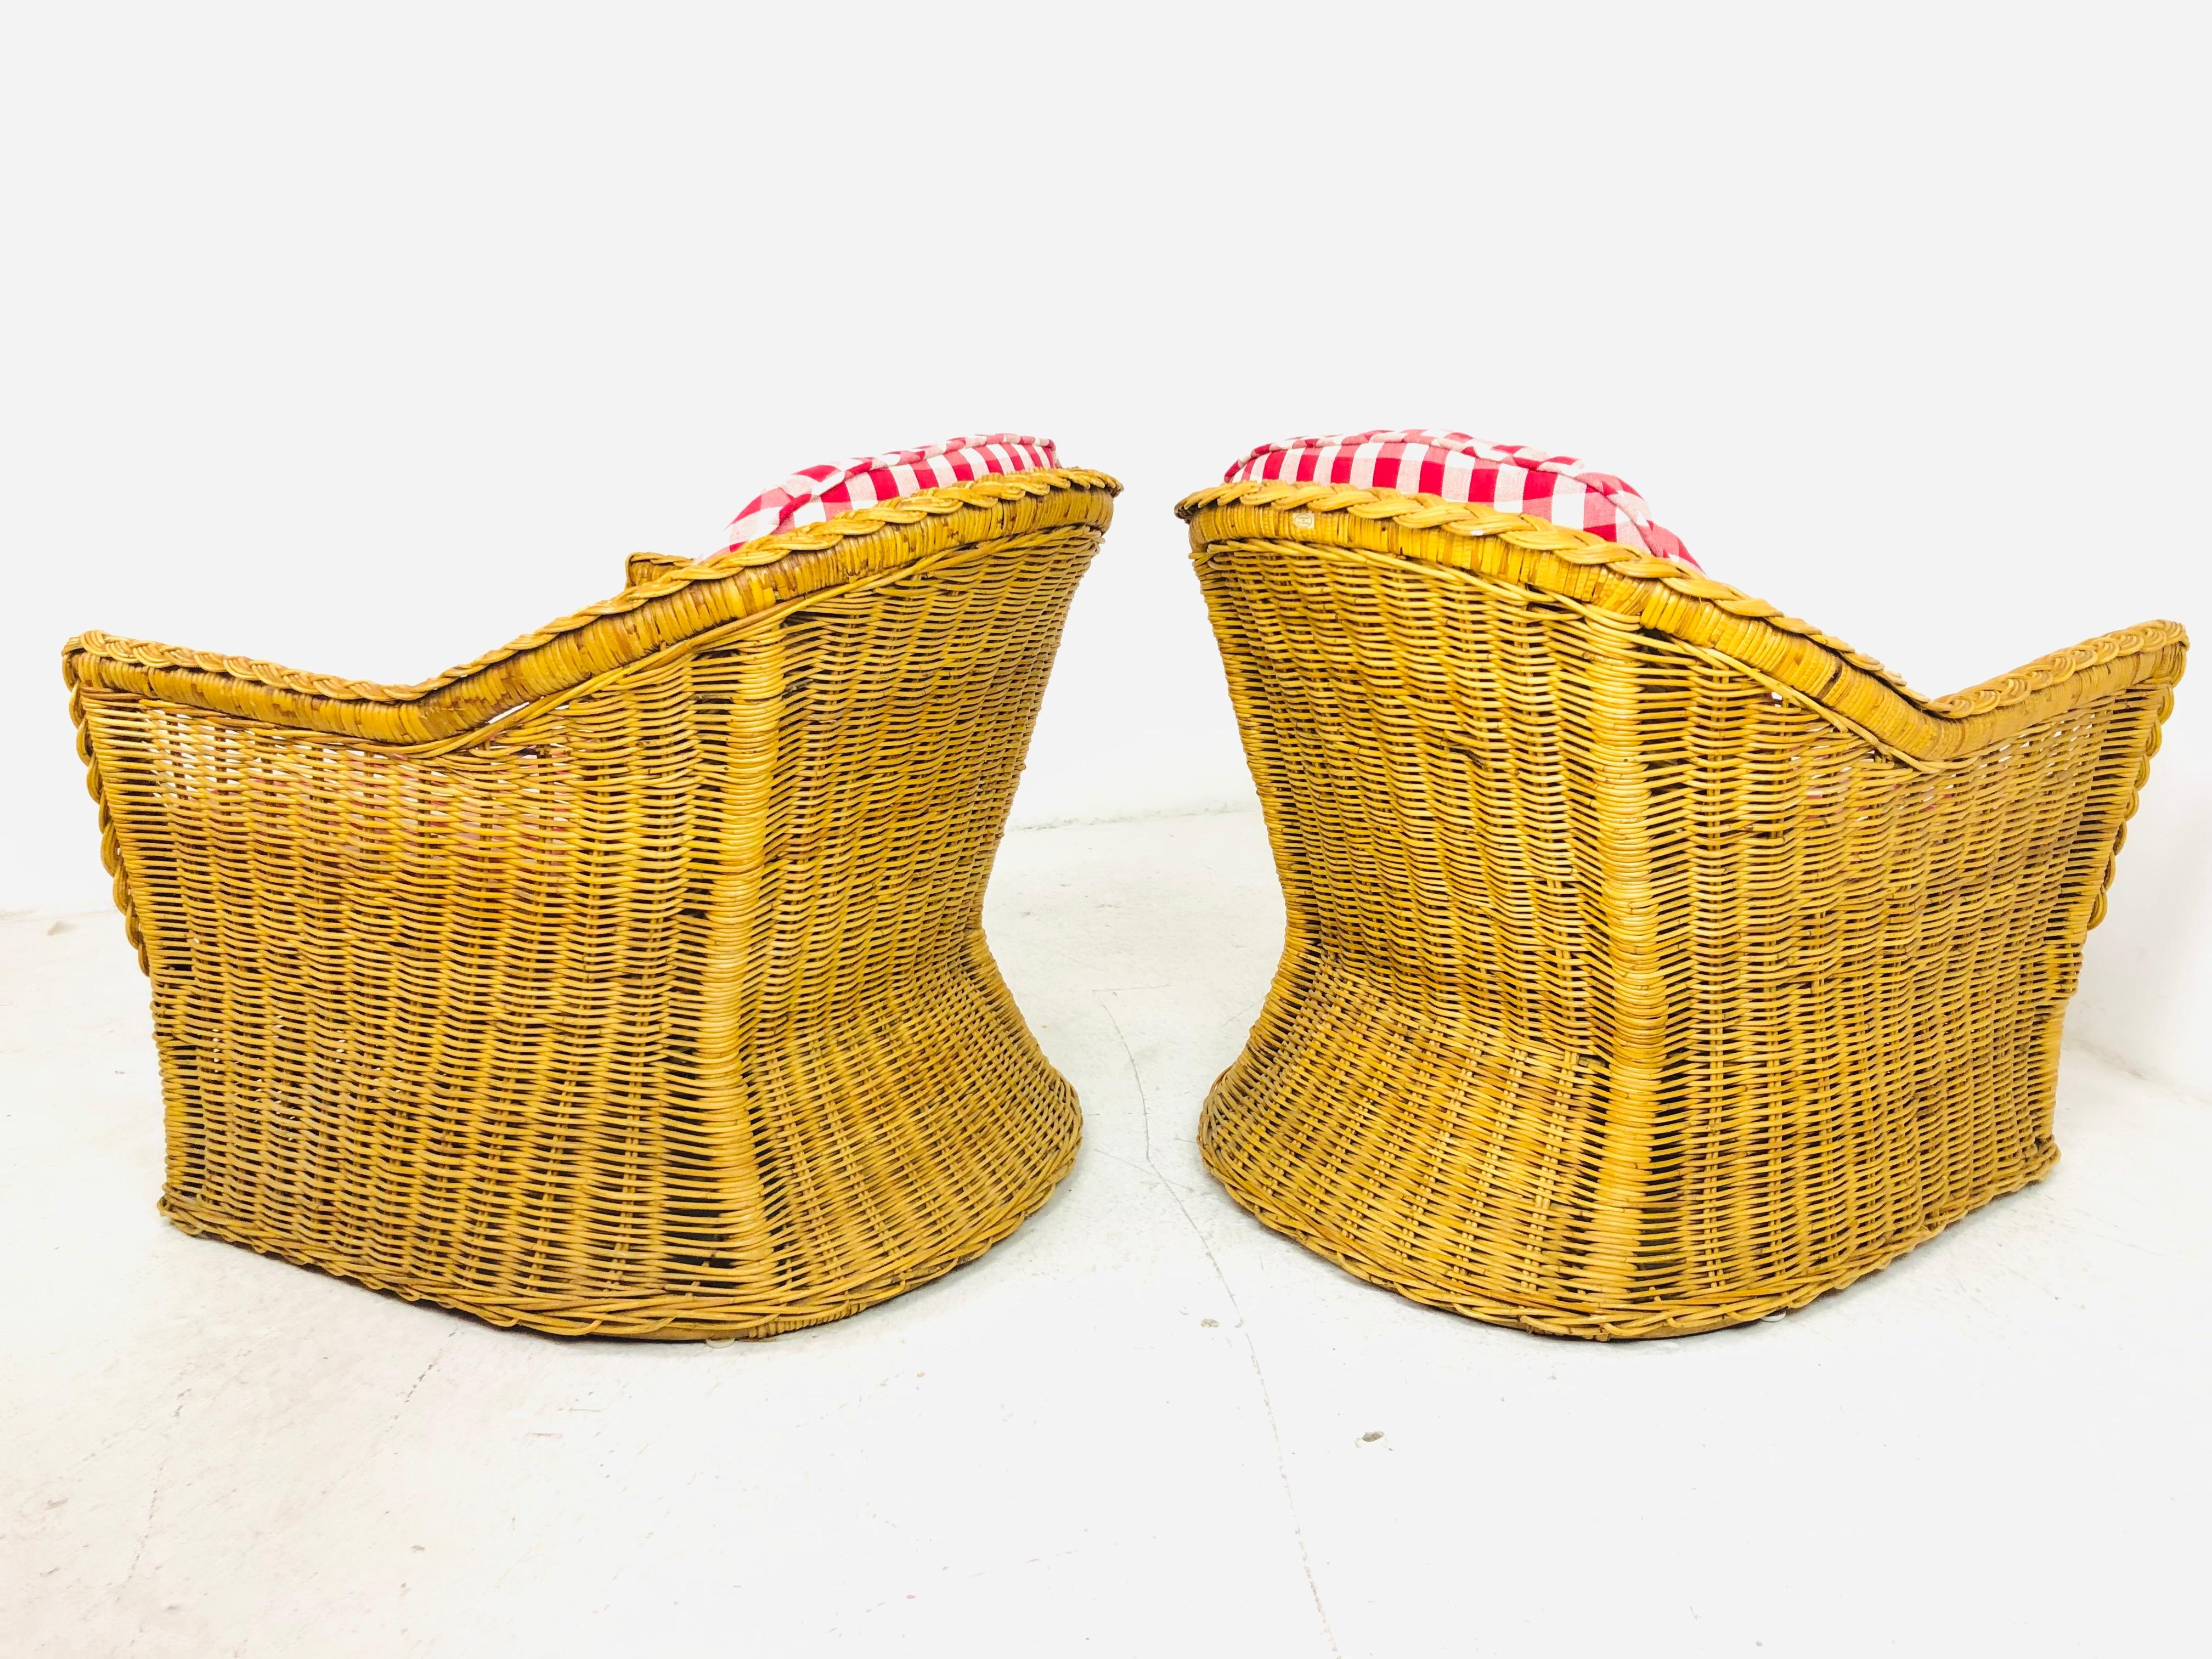 Late 20th Century Pair of Braided Rattan Chairs by Wicker Works